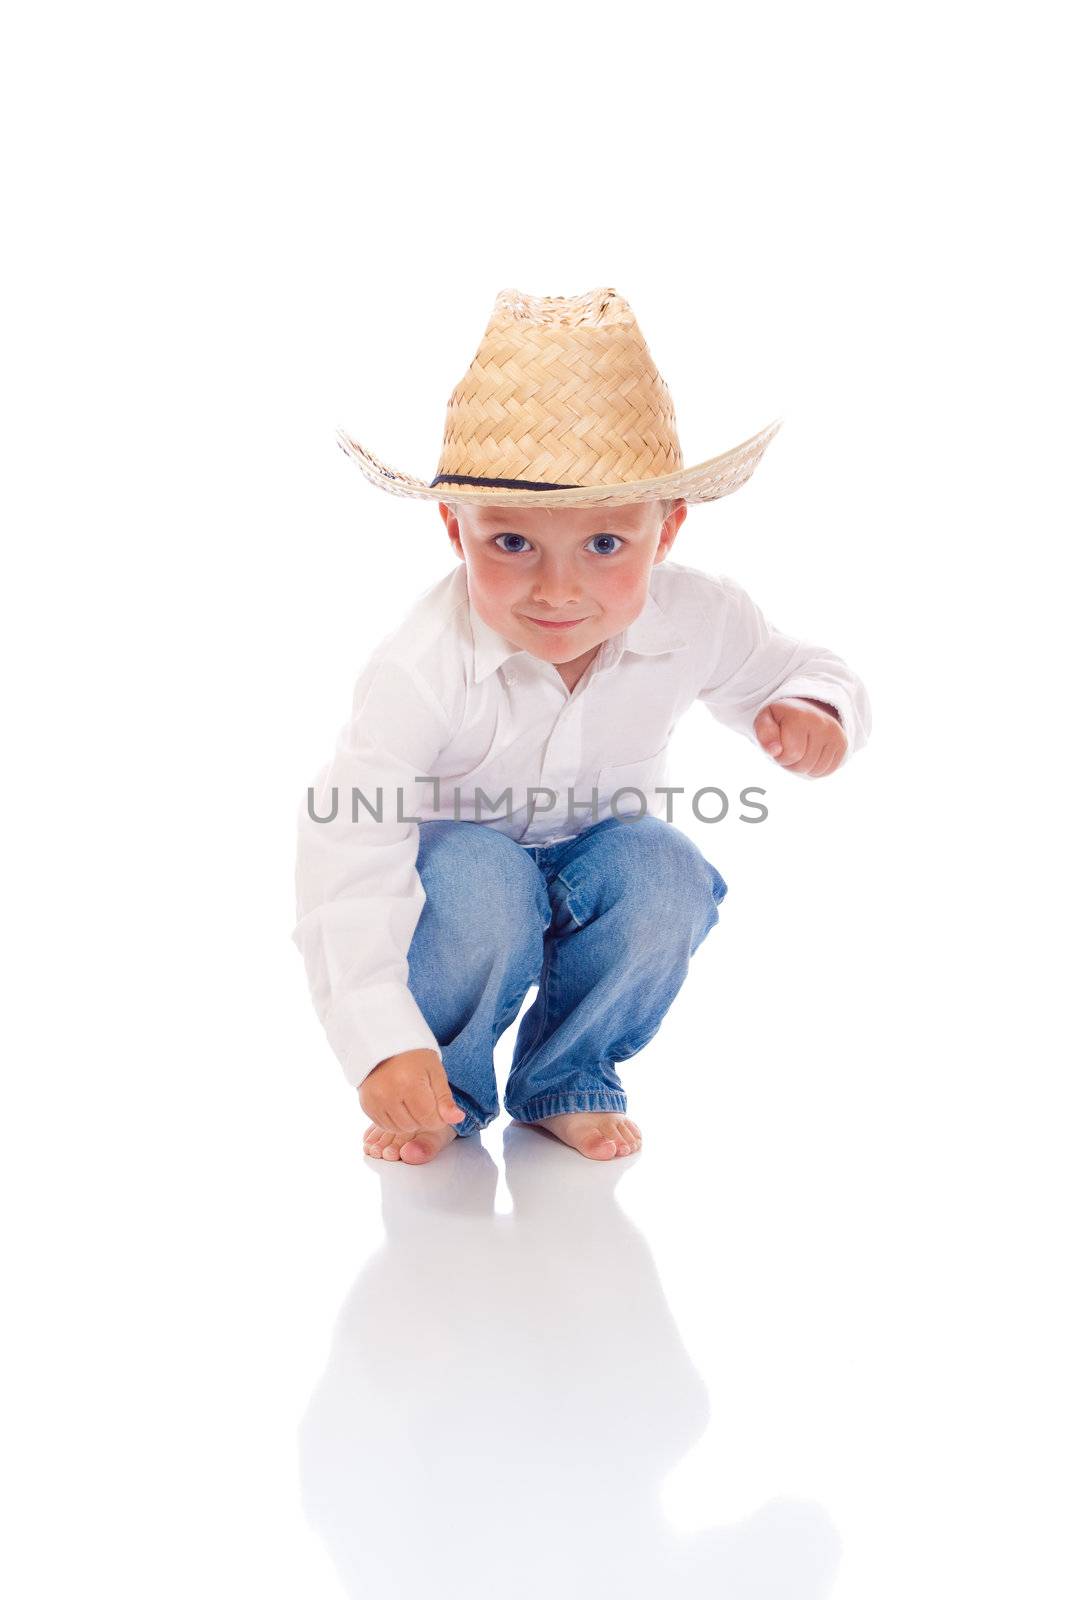 Little boy with a hat playing